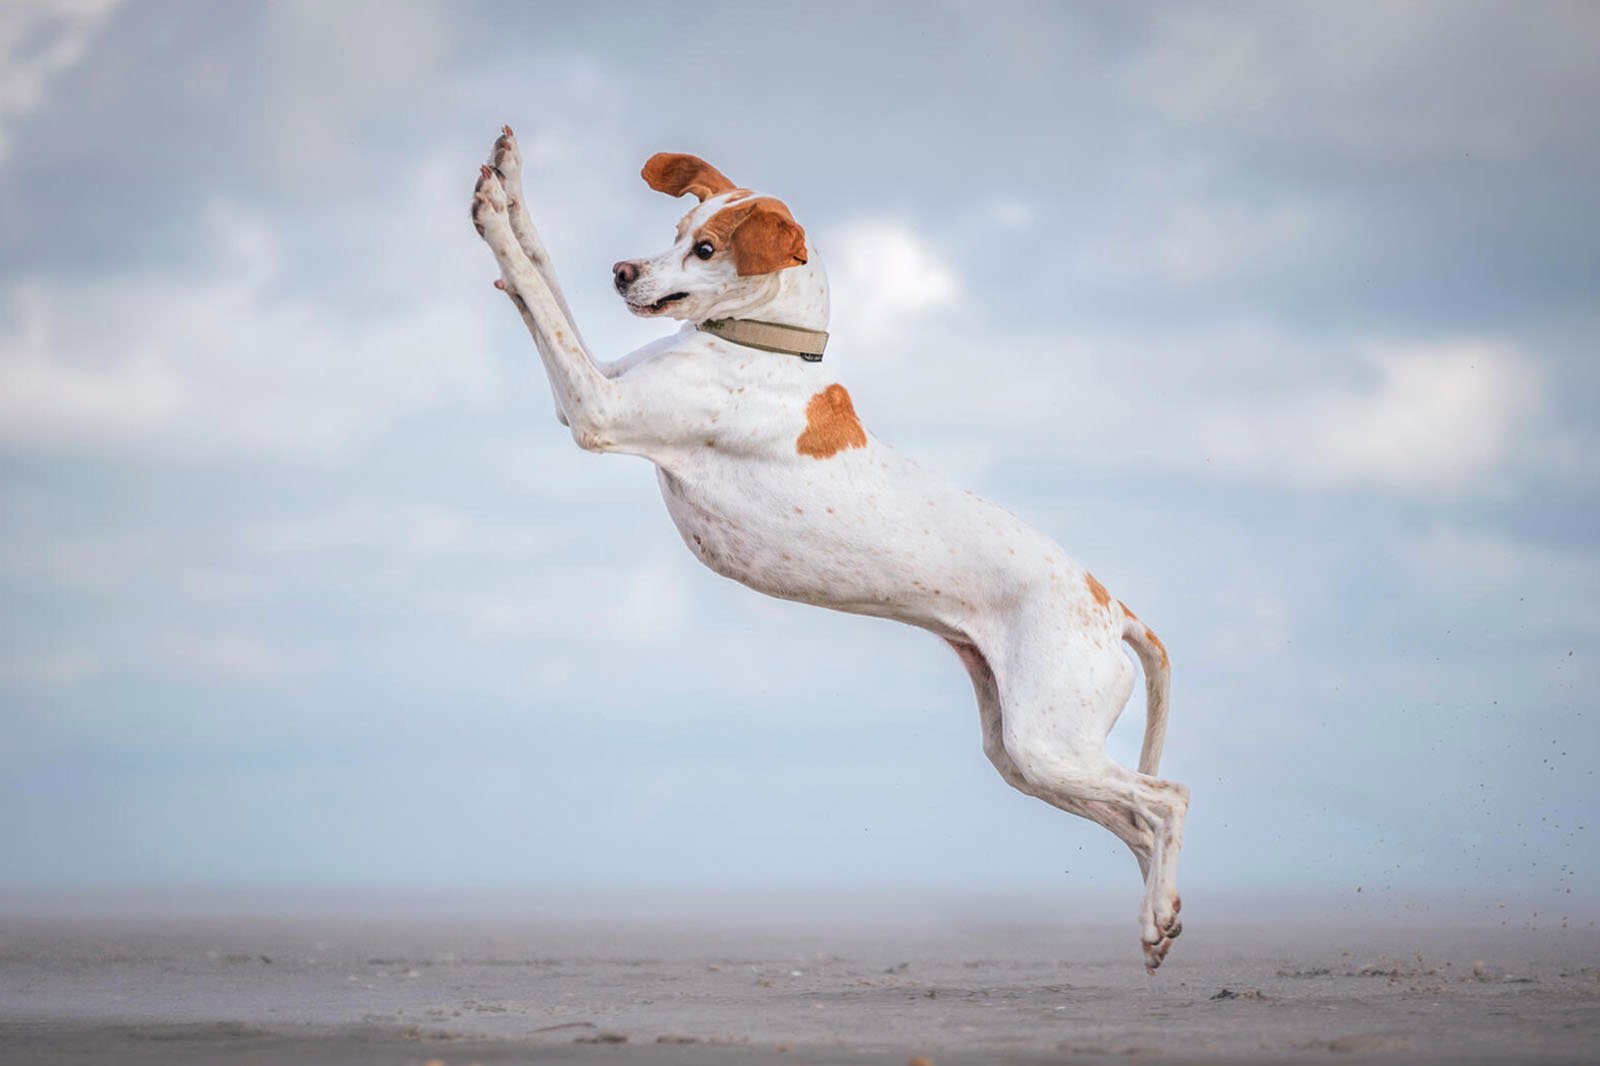 A brown and white dog joyfully leaping into the air on a sandy beach under a cloudy sky.